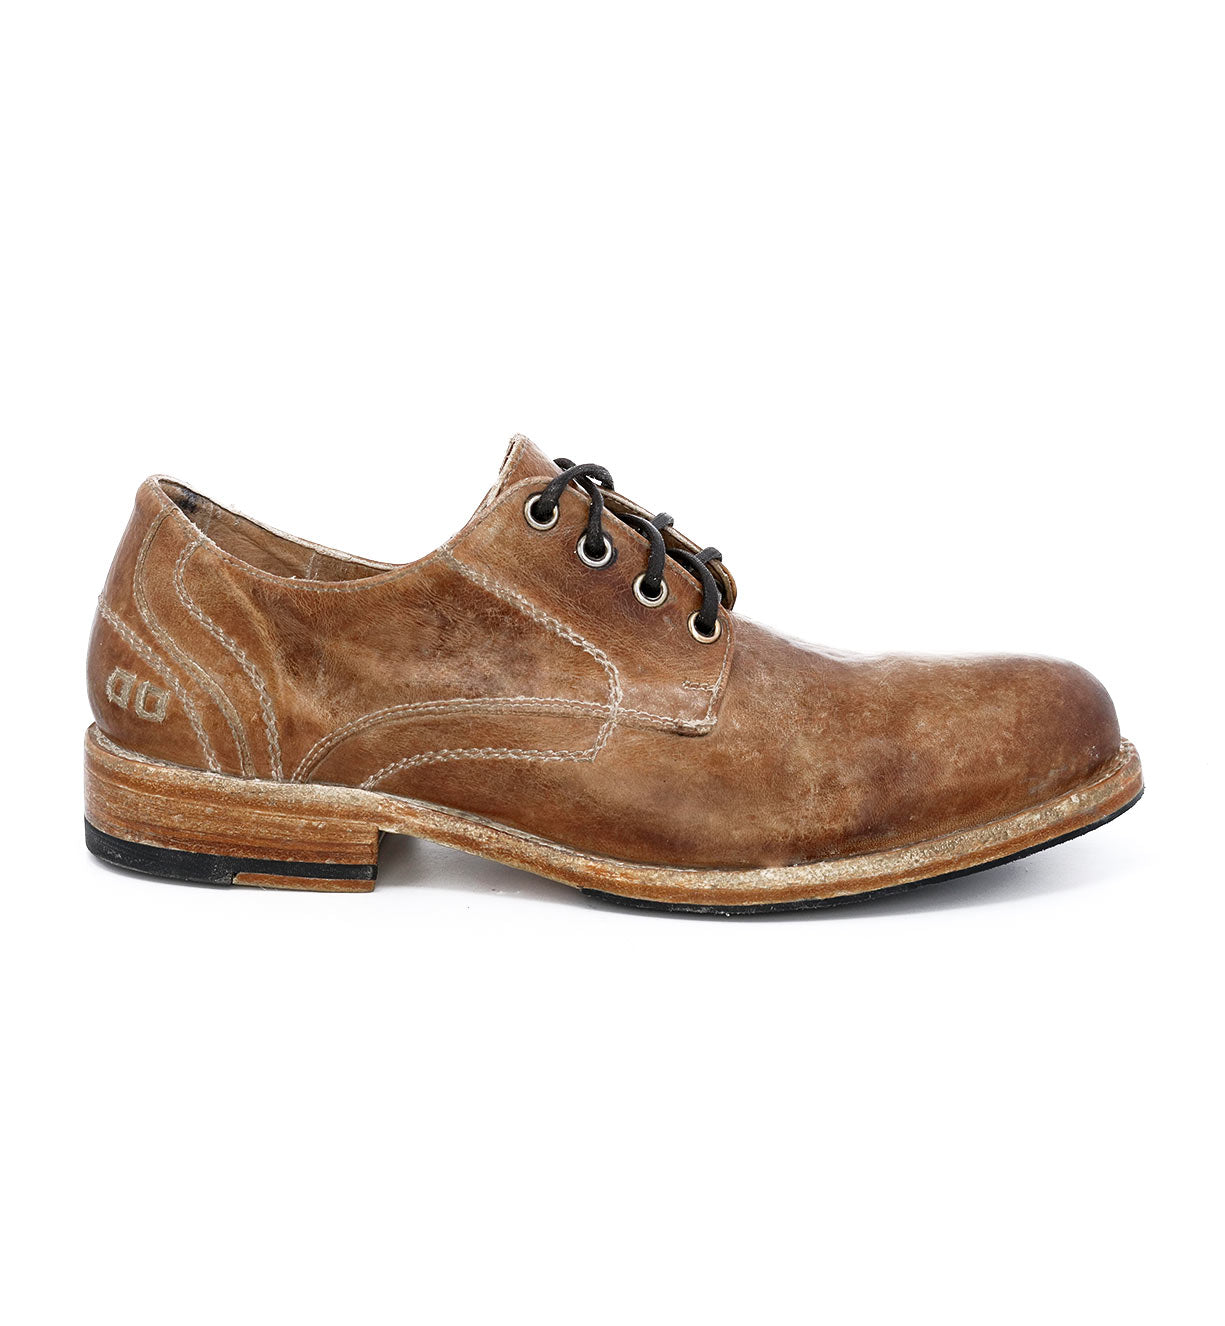 A men's brown lace up Bed Stu Galao oxford shoe.